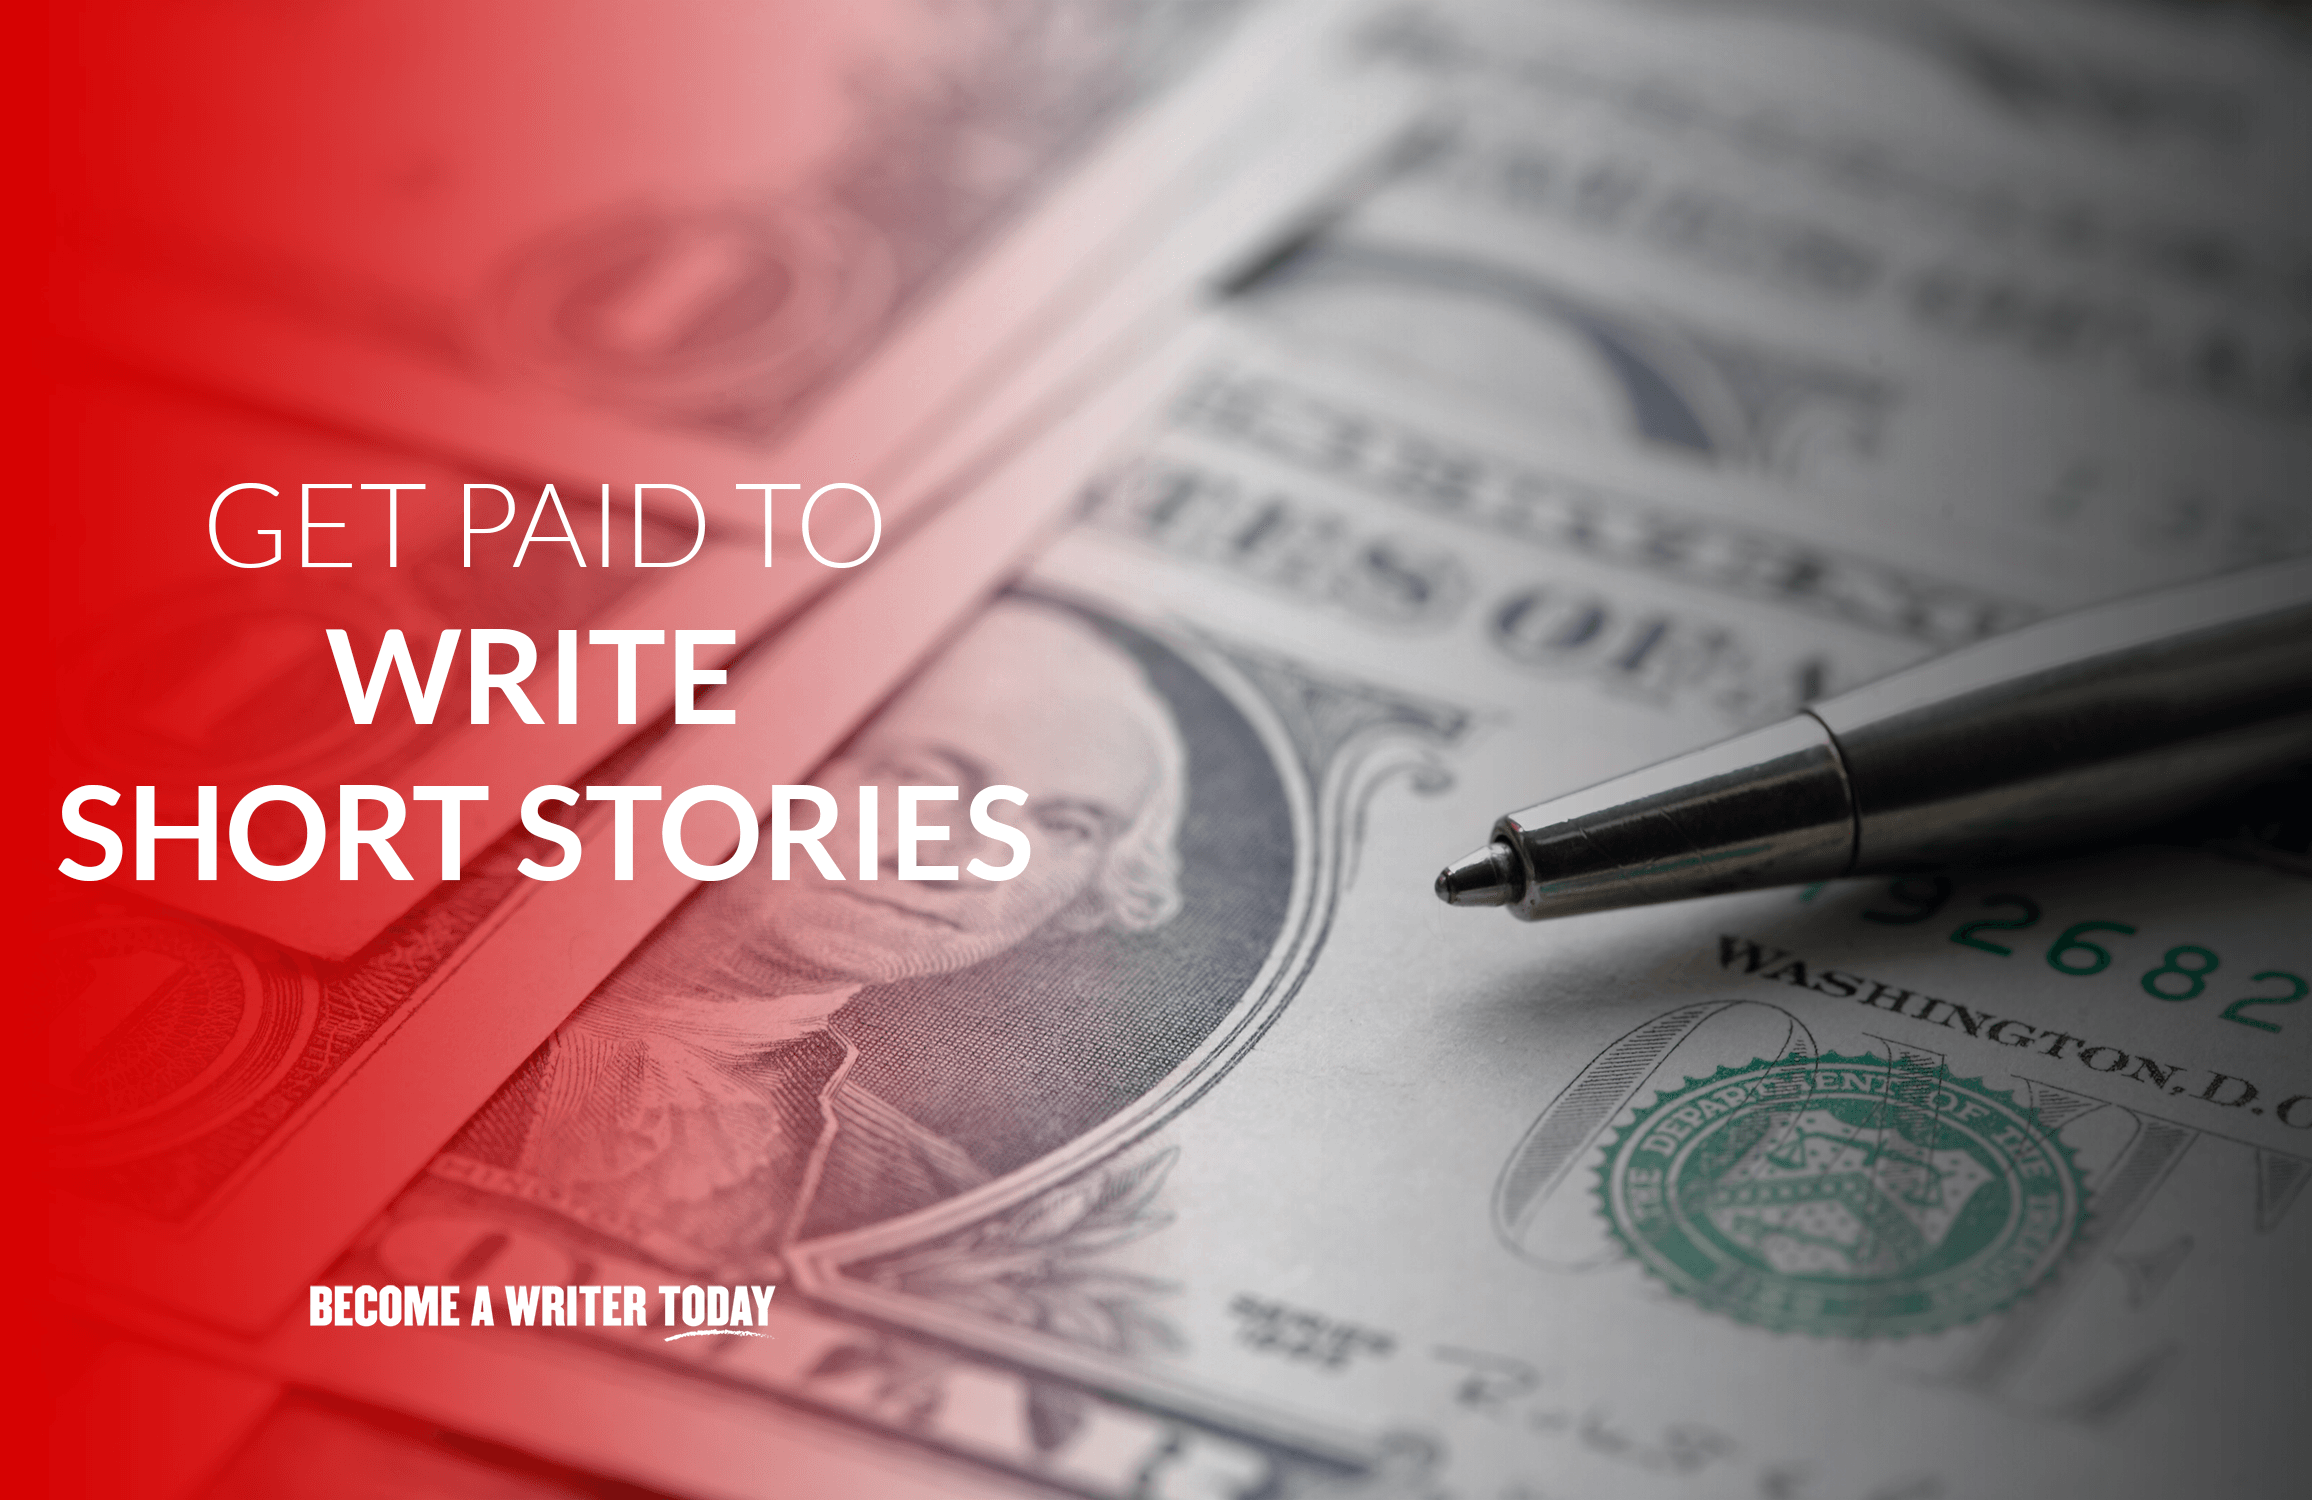 Get Paid to Write Stories